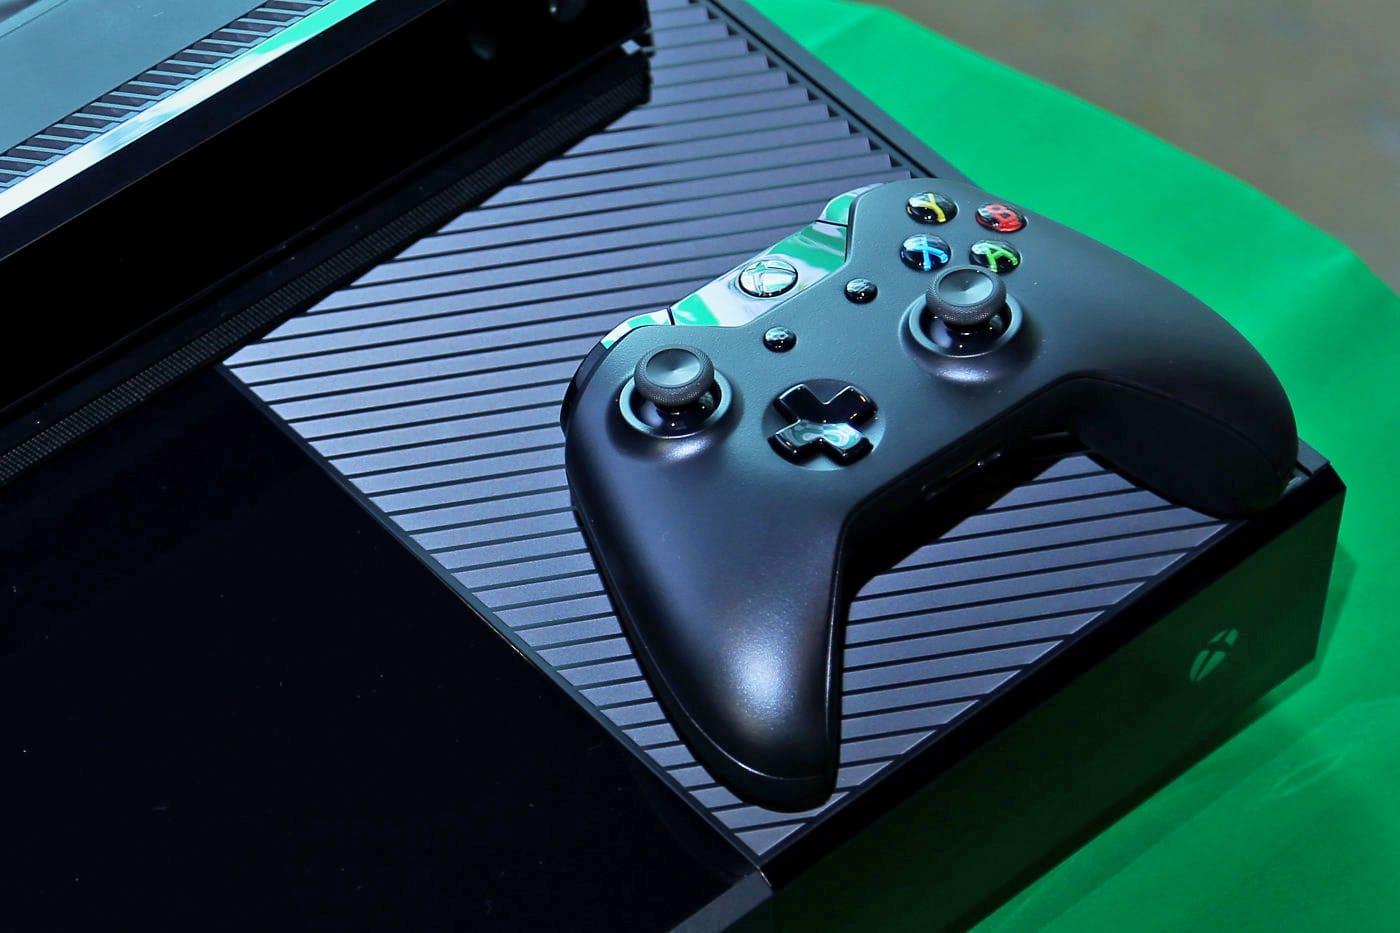 Xbox One drops to $299 in Microsoft's spring game sale1400 x 933